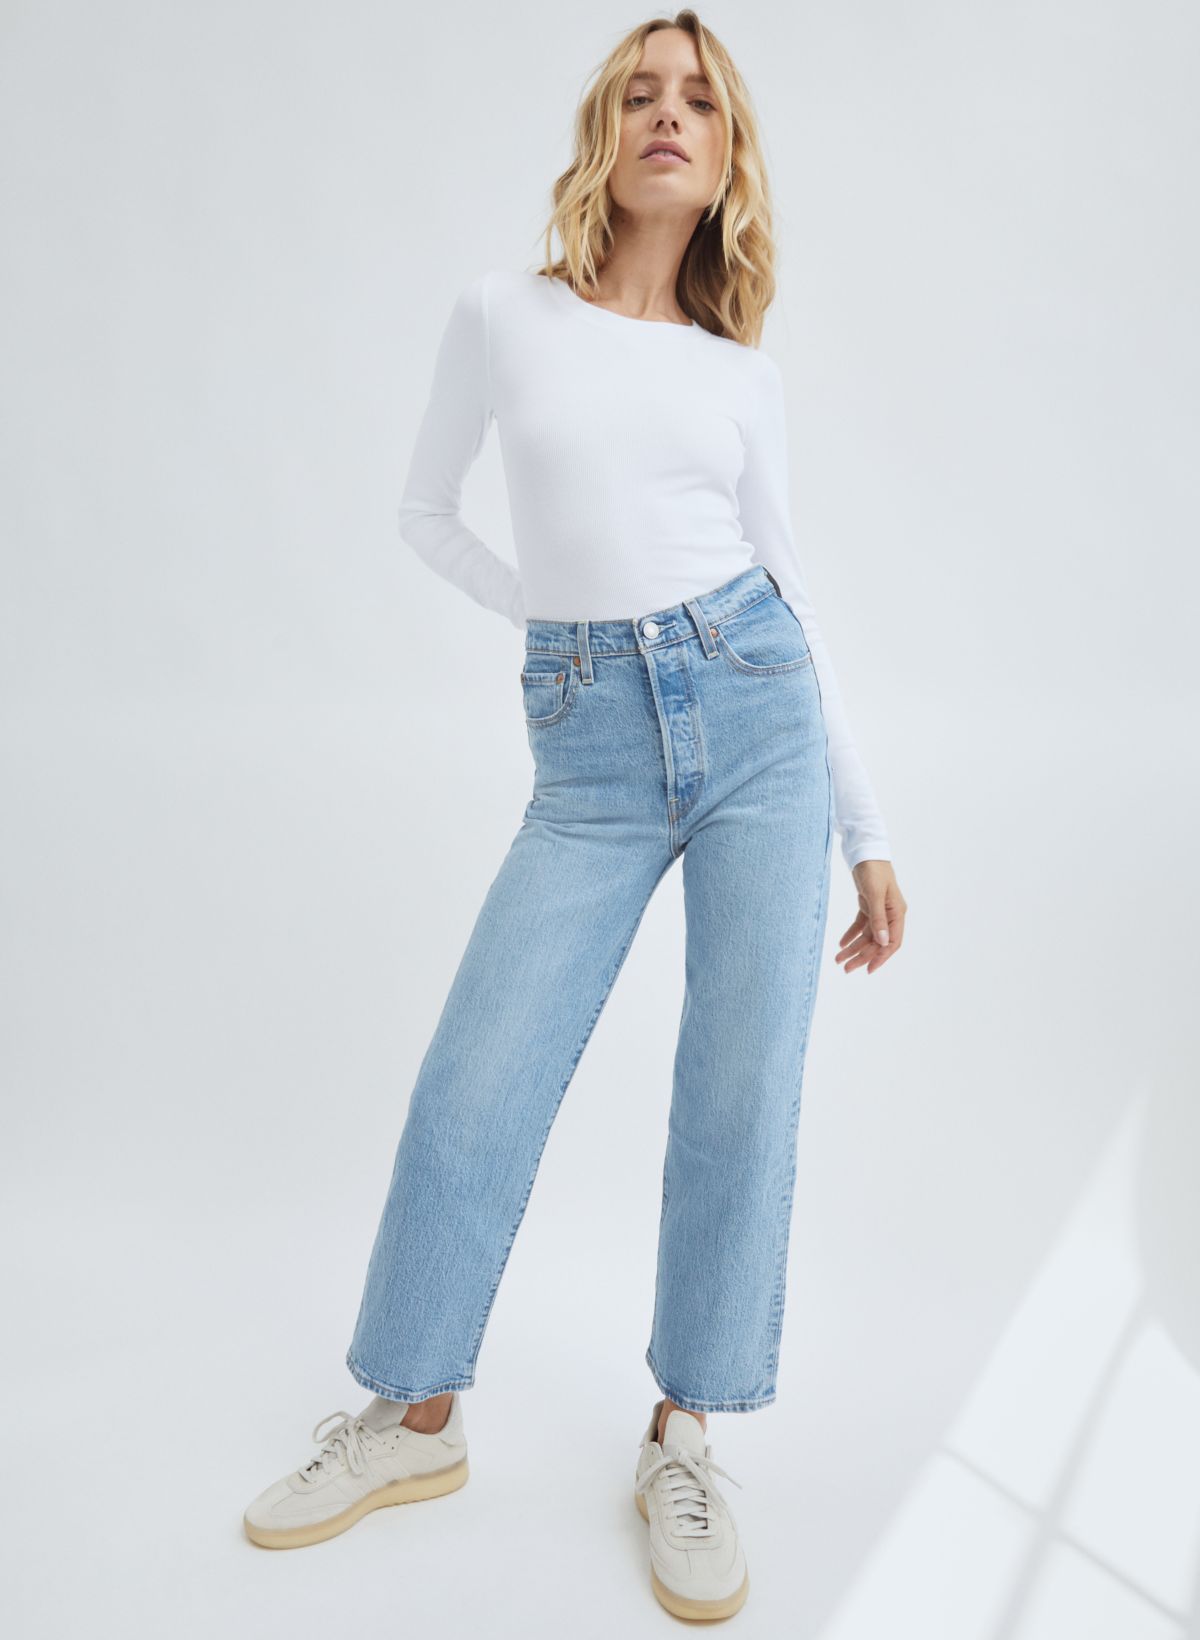 Levi's RIBCAGE STRAIGHT ANKLE Aritzia US, 58% OFF